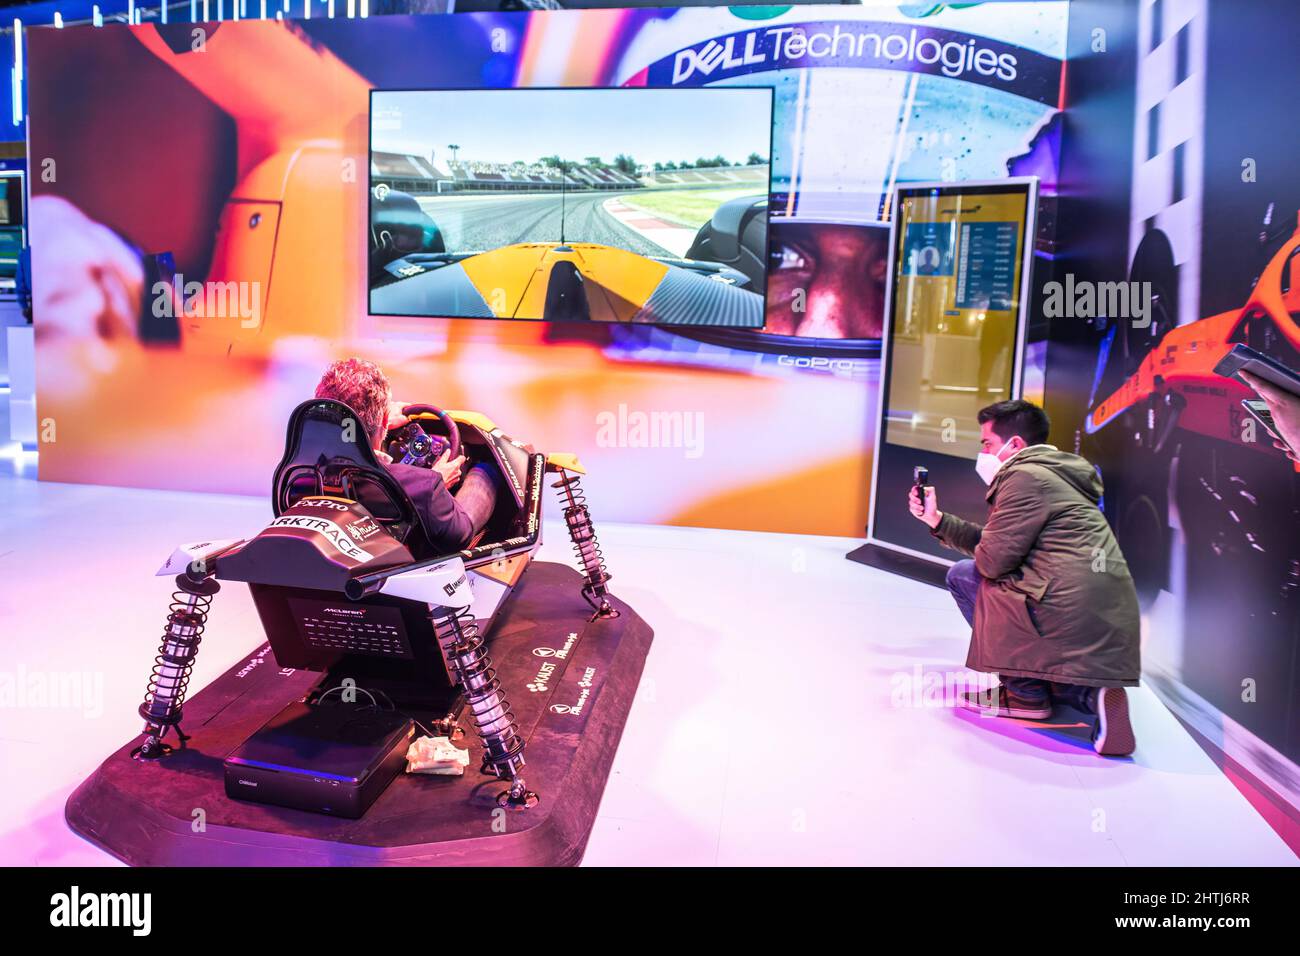 A customer seen testing a car simulator at a Dell booth during the first day of Mobile World Congress 2022 (MWC) at the Fira de Barcelona. (Photo by Thiago Prudencio / SOPA Images/Sipa USA) Stock Photo